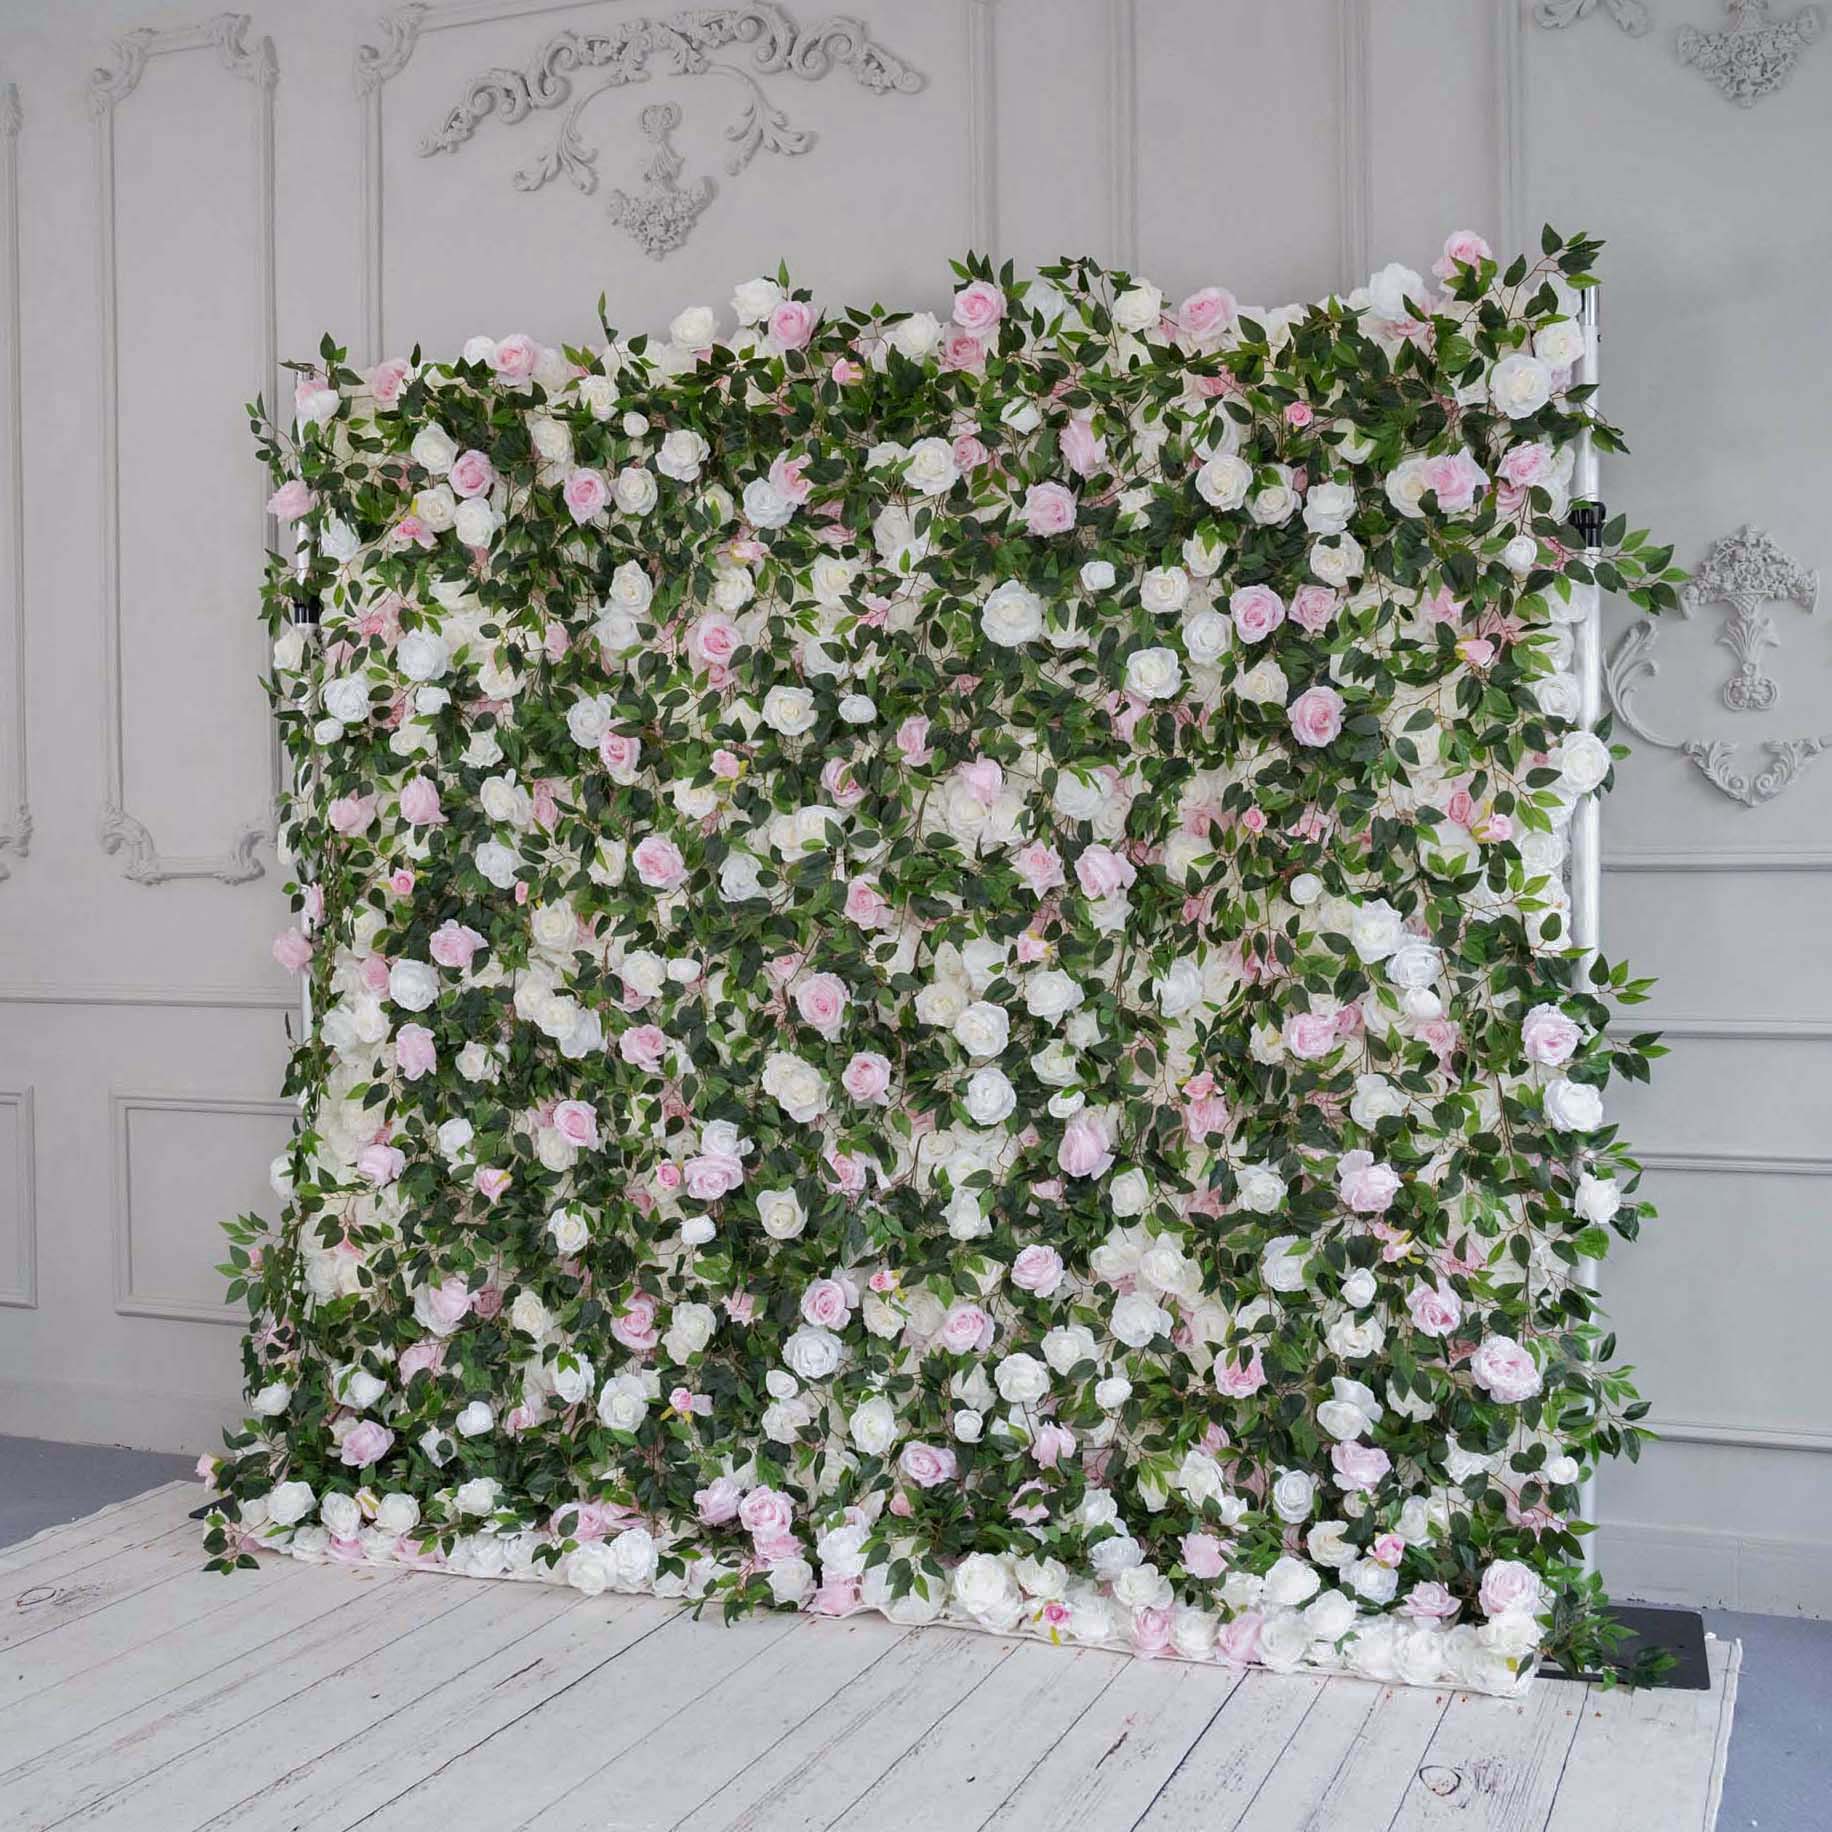 Flower Wall Pink Rose & Green Fabric Rolling Up Curtain Floral Backdrop Wedding Party Proposal Decor